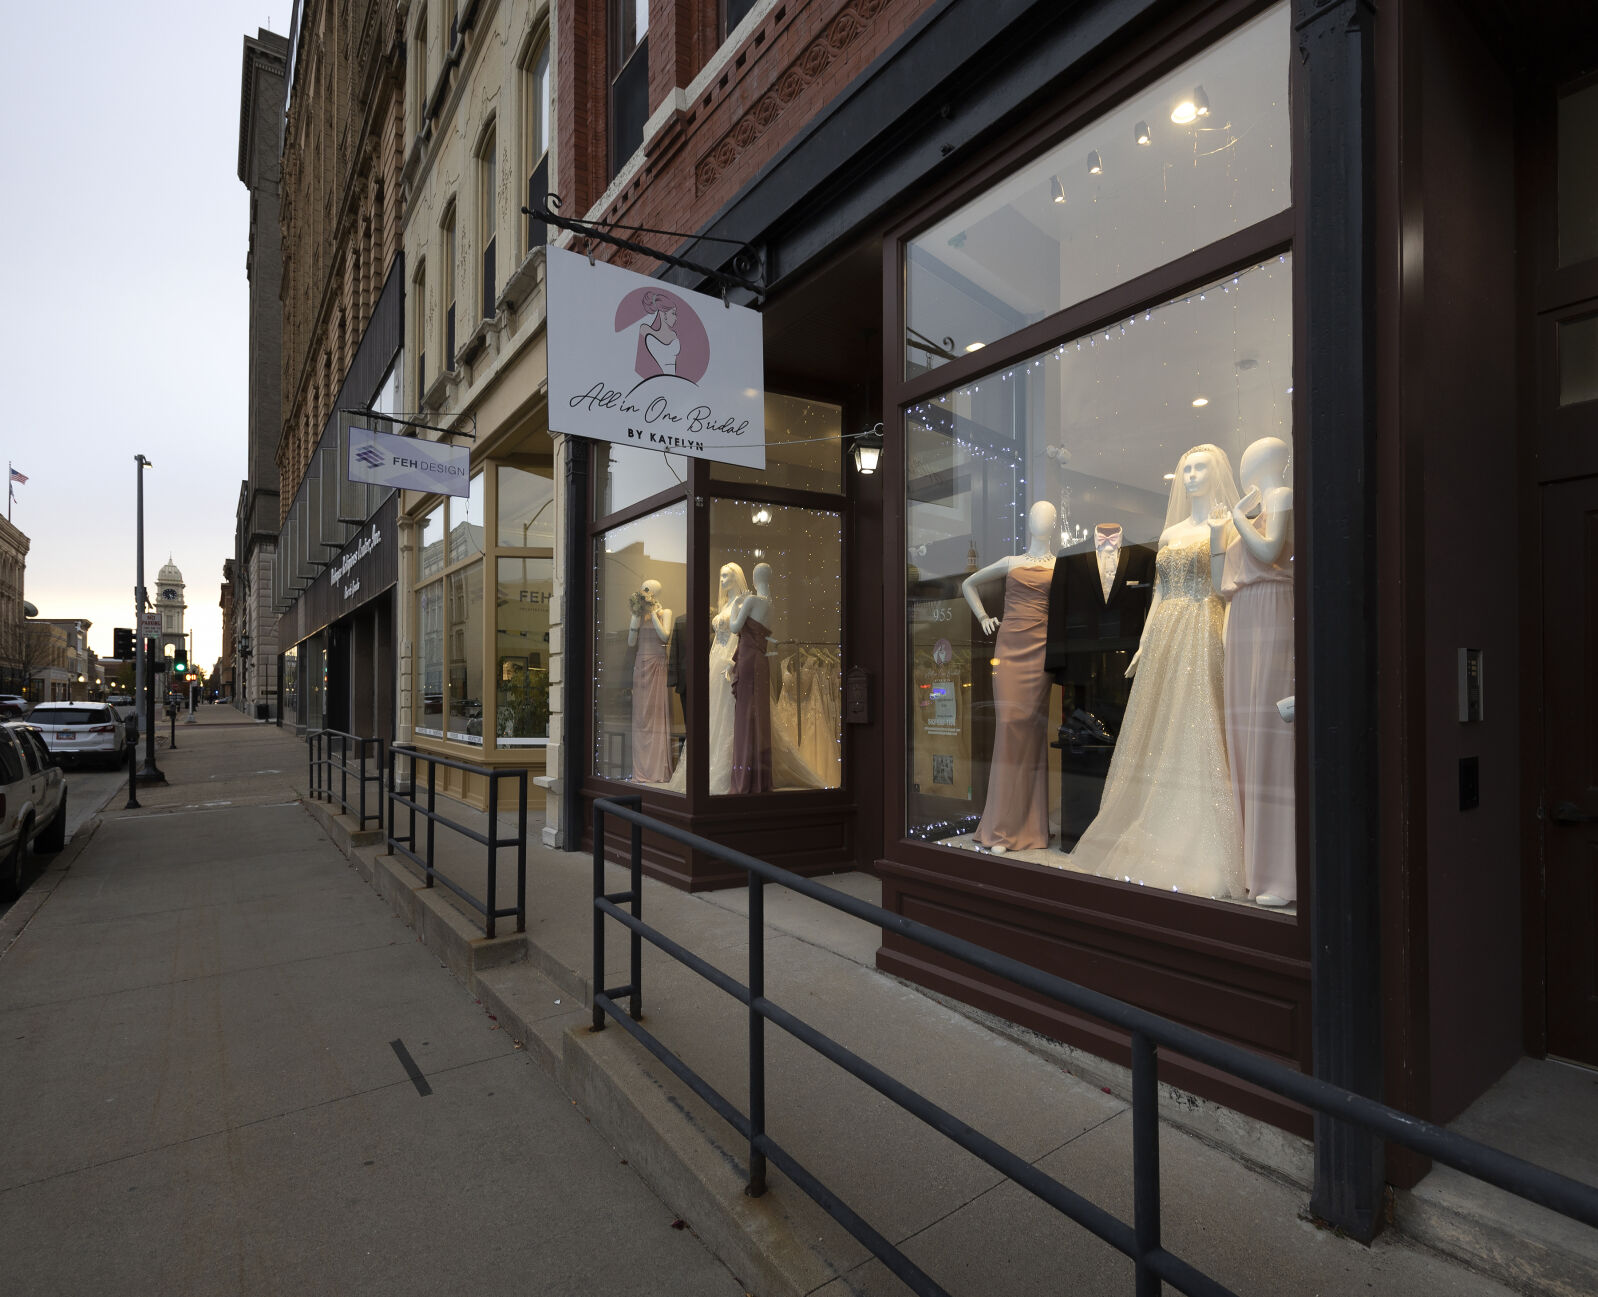 All in One Bridal is located on Main Street in Dubuque.    PHOTO CREDIT: Stephen Gassman
Telegraph Herald